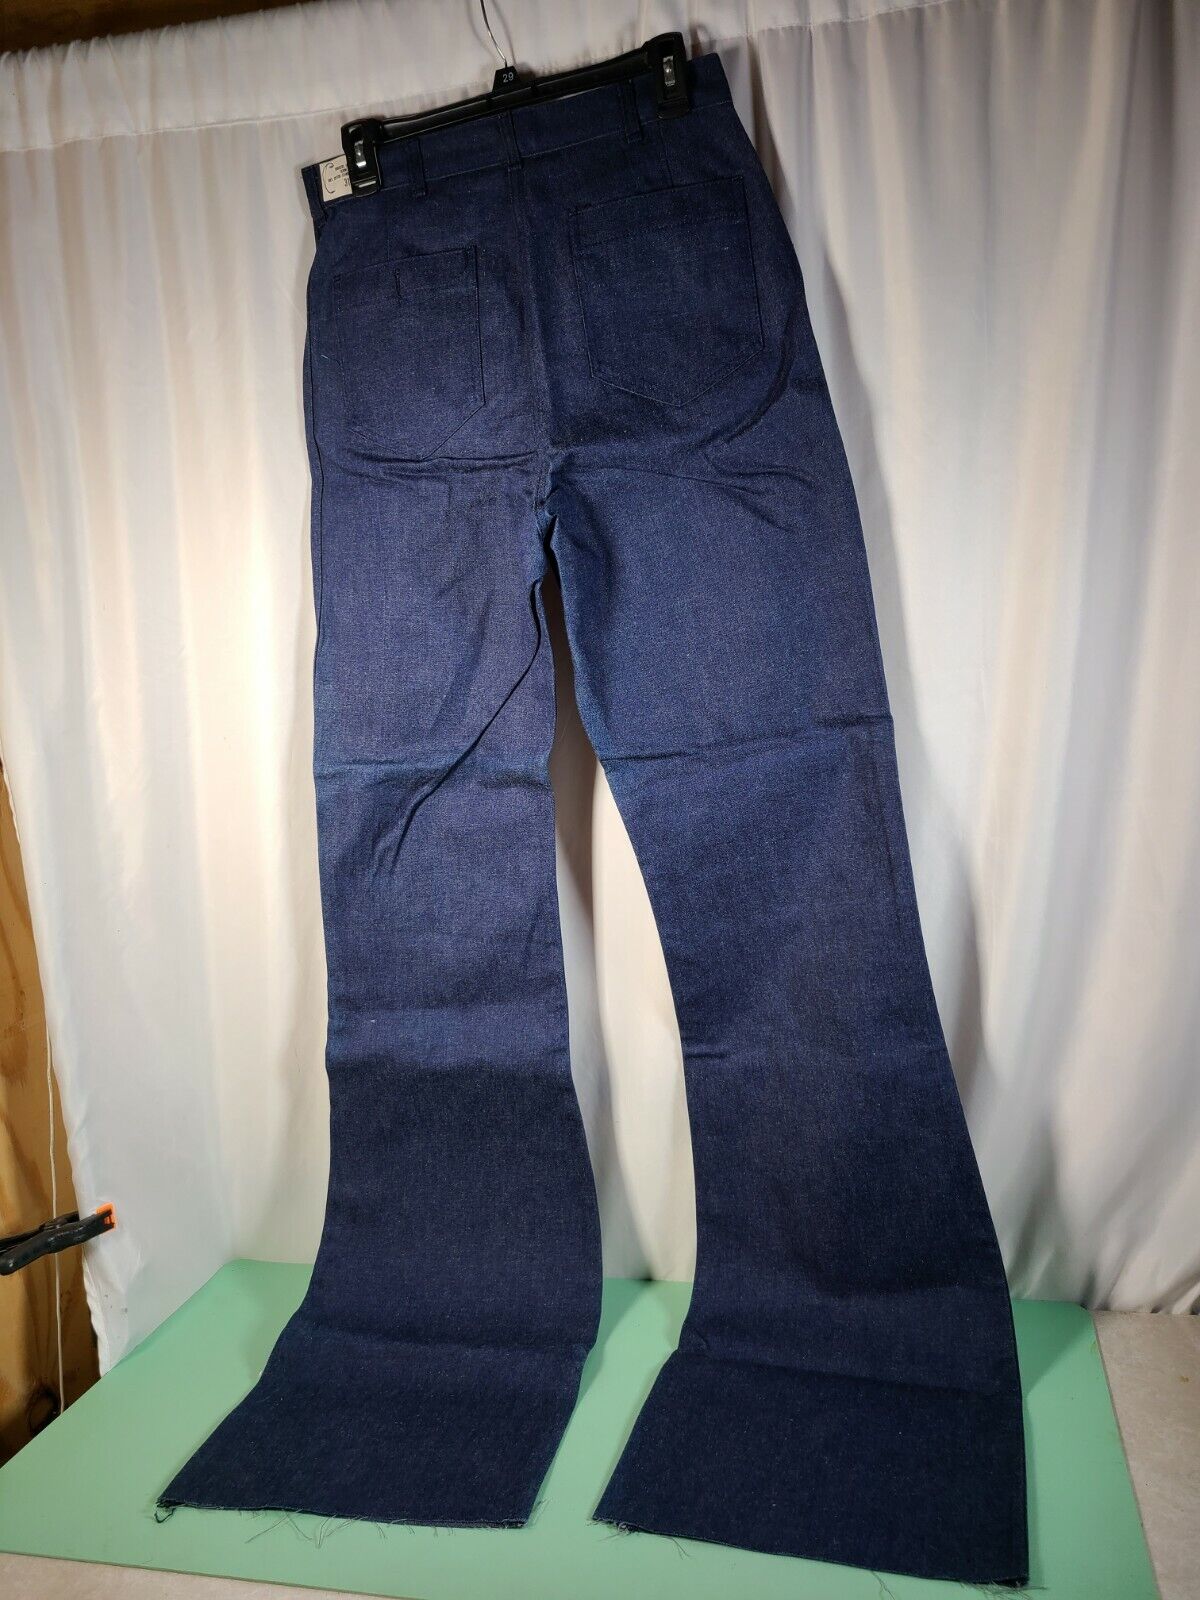 Vintage Military Issued US NAVY USN Denim Type II Utility Trousers 31 XLONG  NEW